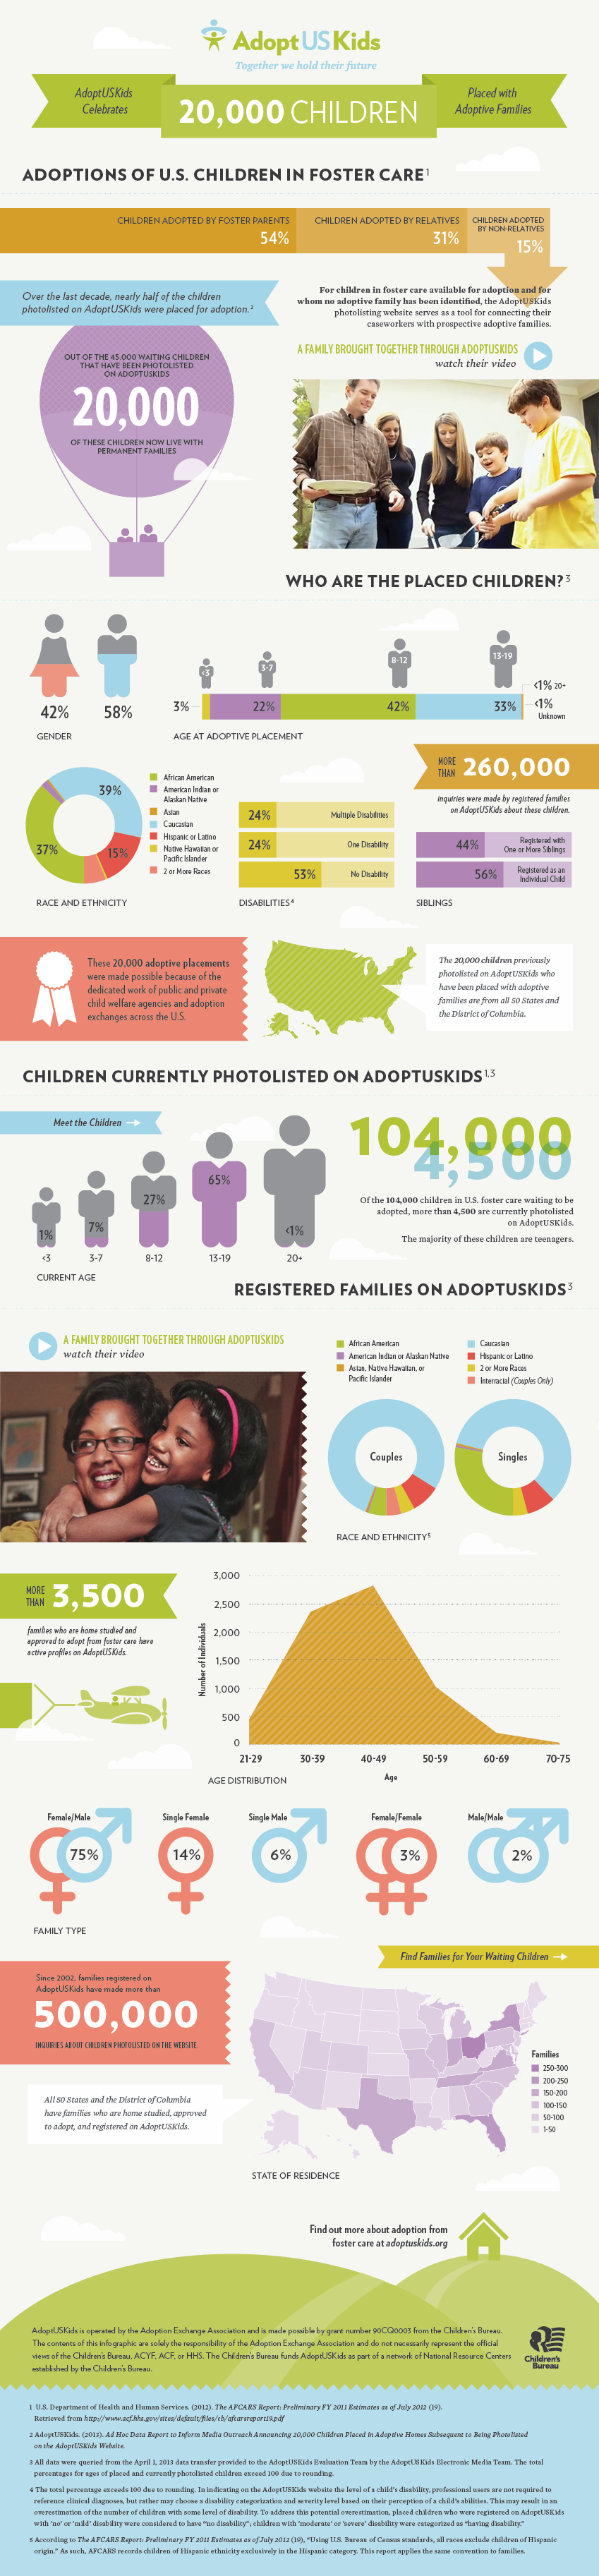 Infographic for AdoptUSKids Celebrating 20,000 Children Placed With Adoptive Families